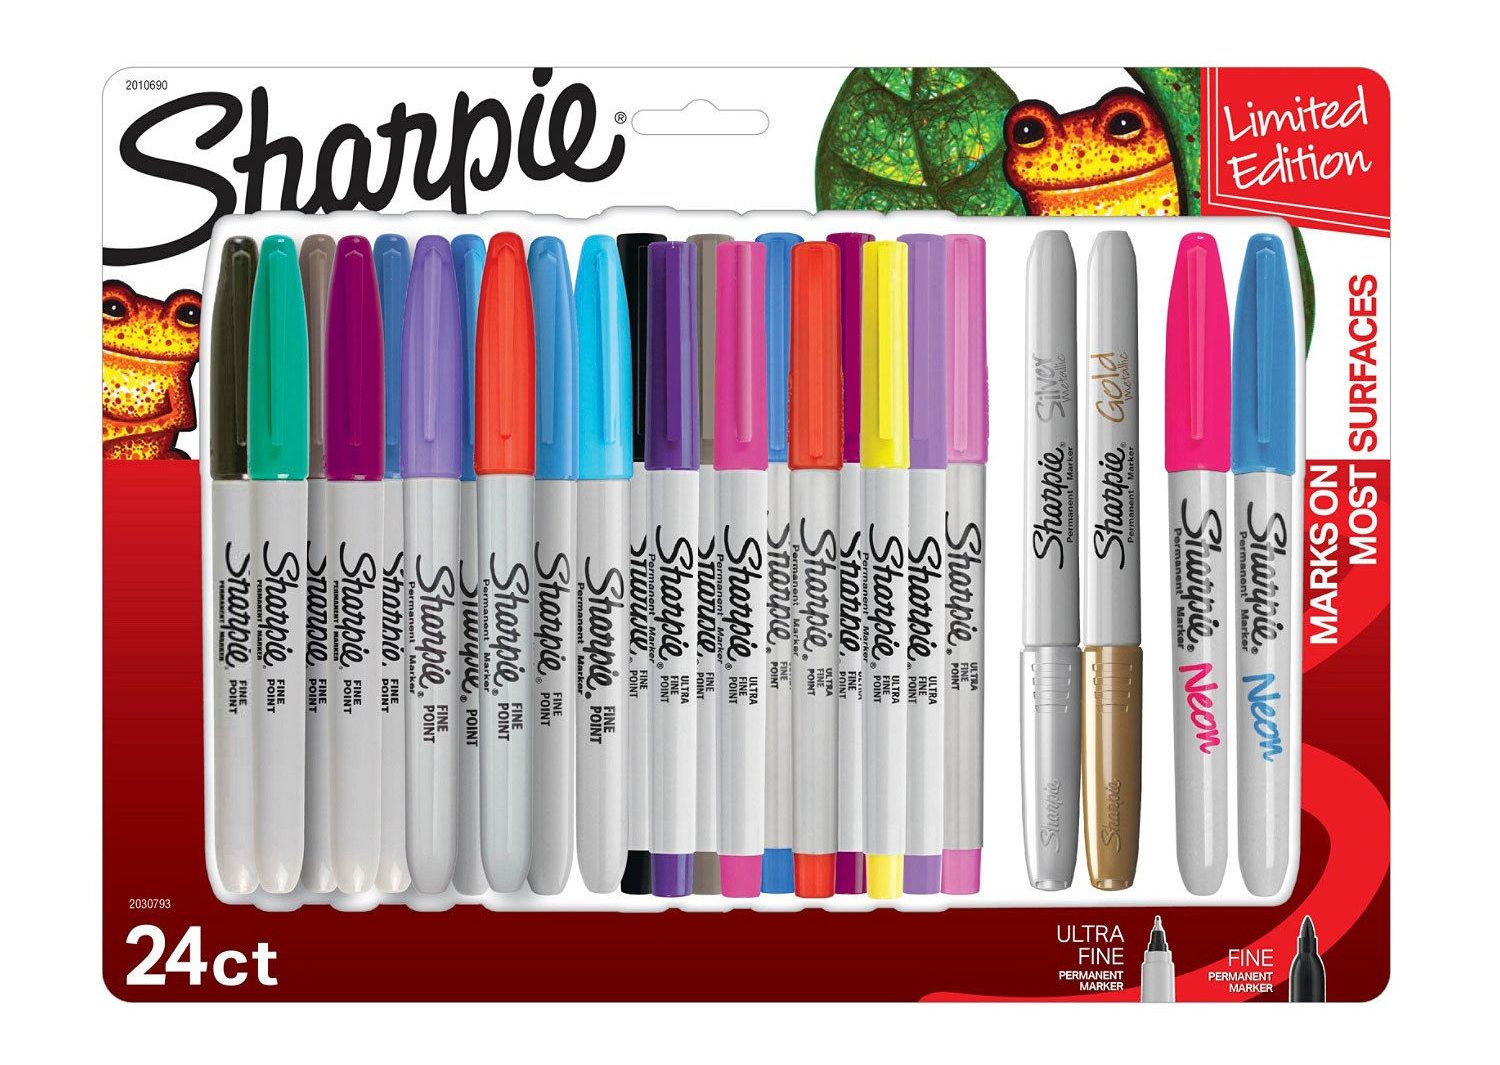 Sharpie Limited Edition Permanent Marker, Fine Point, Assorted Colors, Set of 24—$11.99!